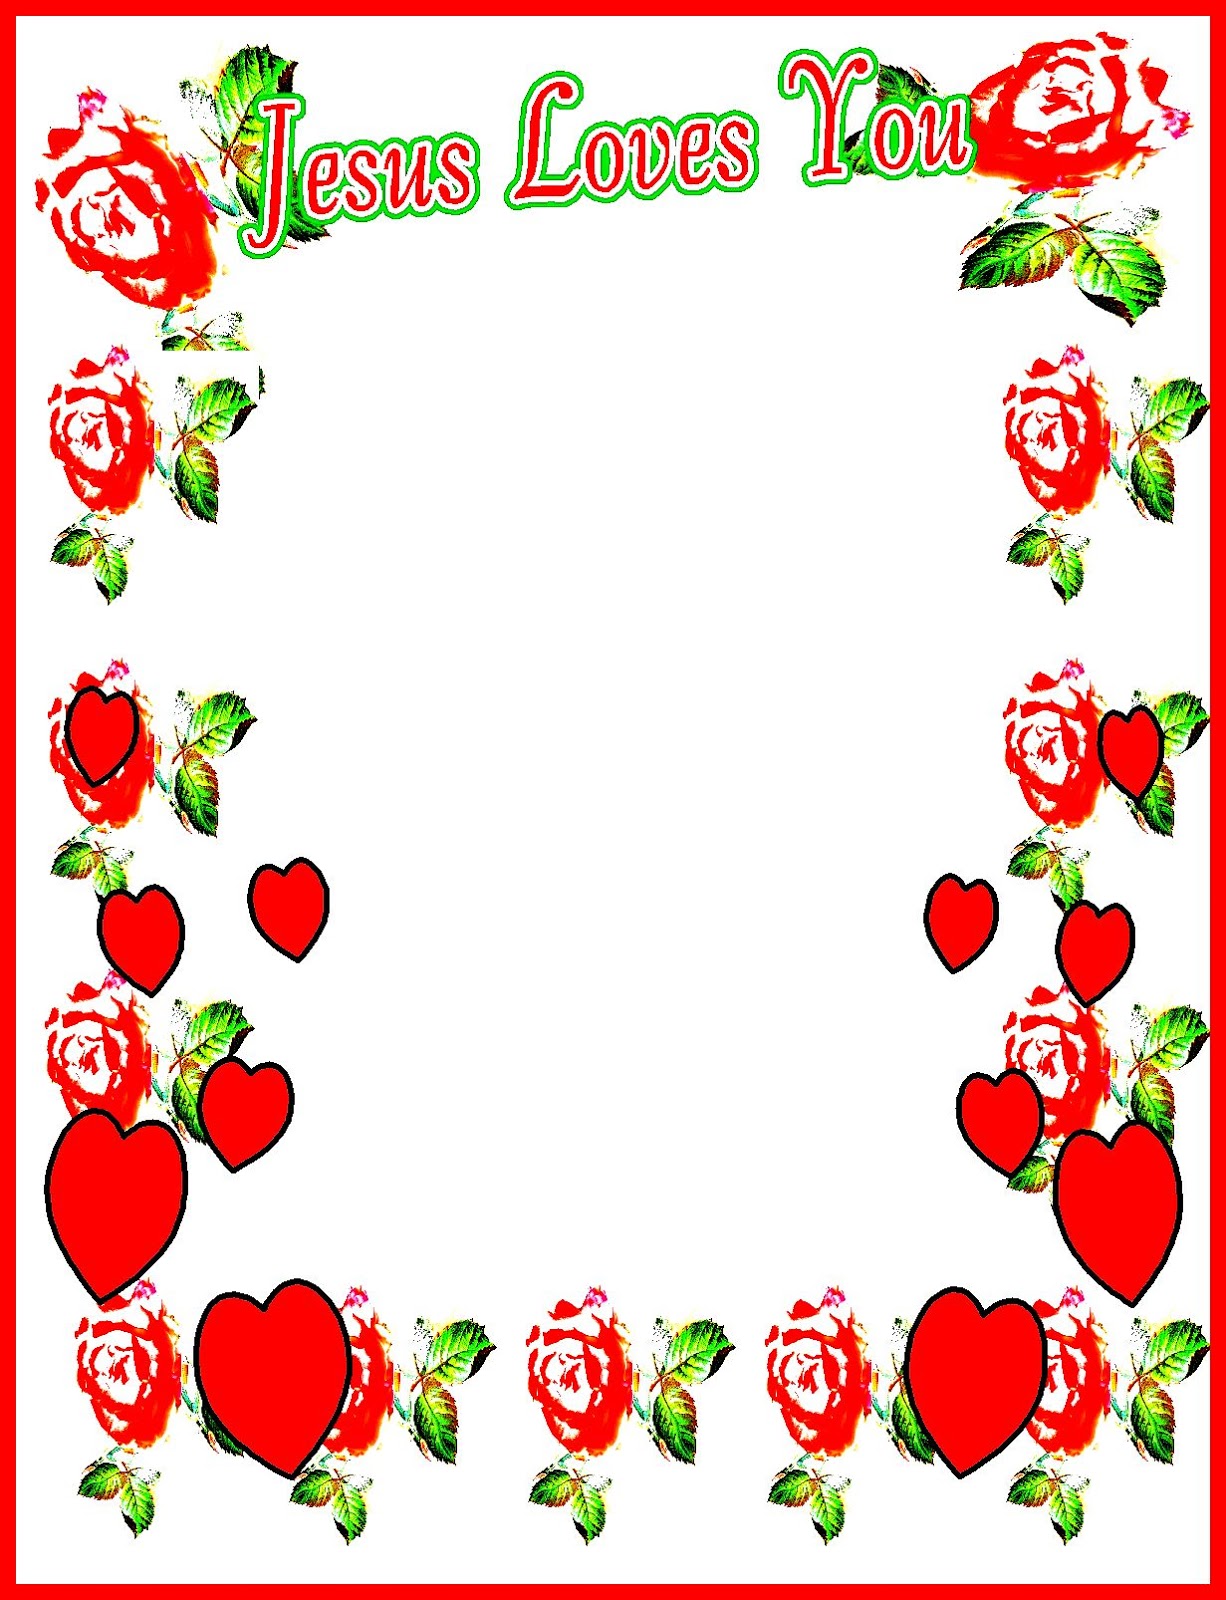 Christian Images In My Treasure Box: Jesus Loves You Borders / Valentine
